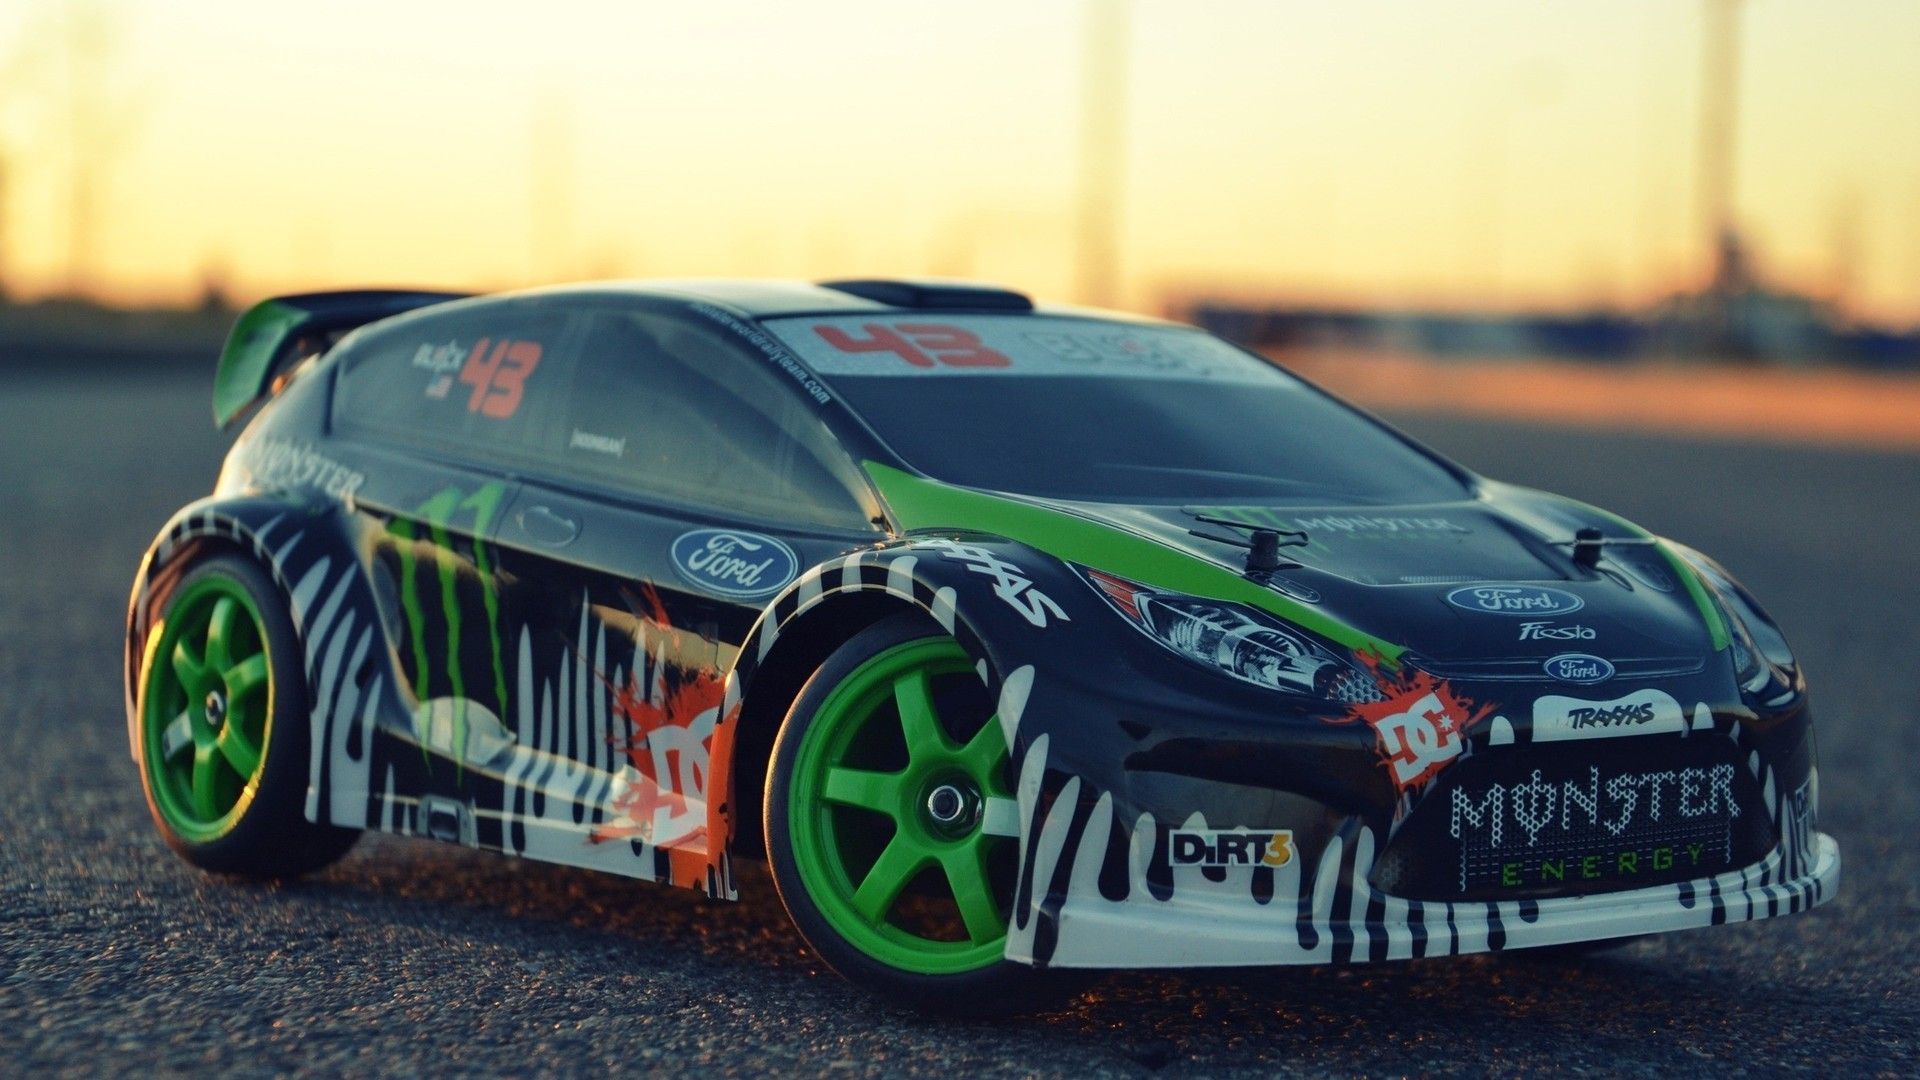 Ford Remote Control Rc Drift Car Laptop Full Hd 1080p - Monster Energy - HD Wallpaper 